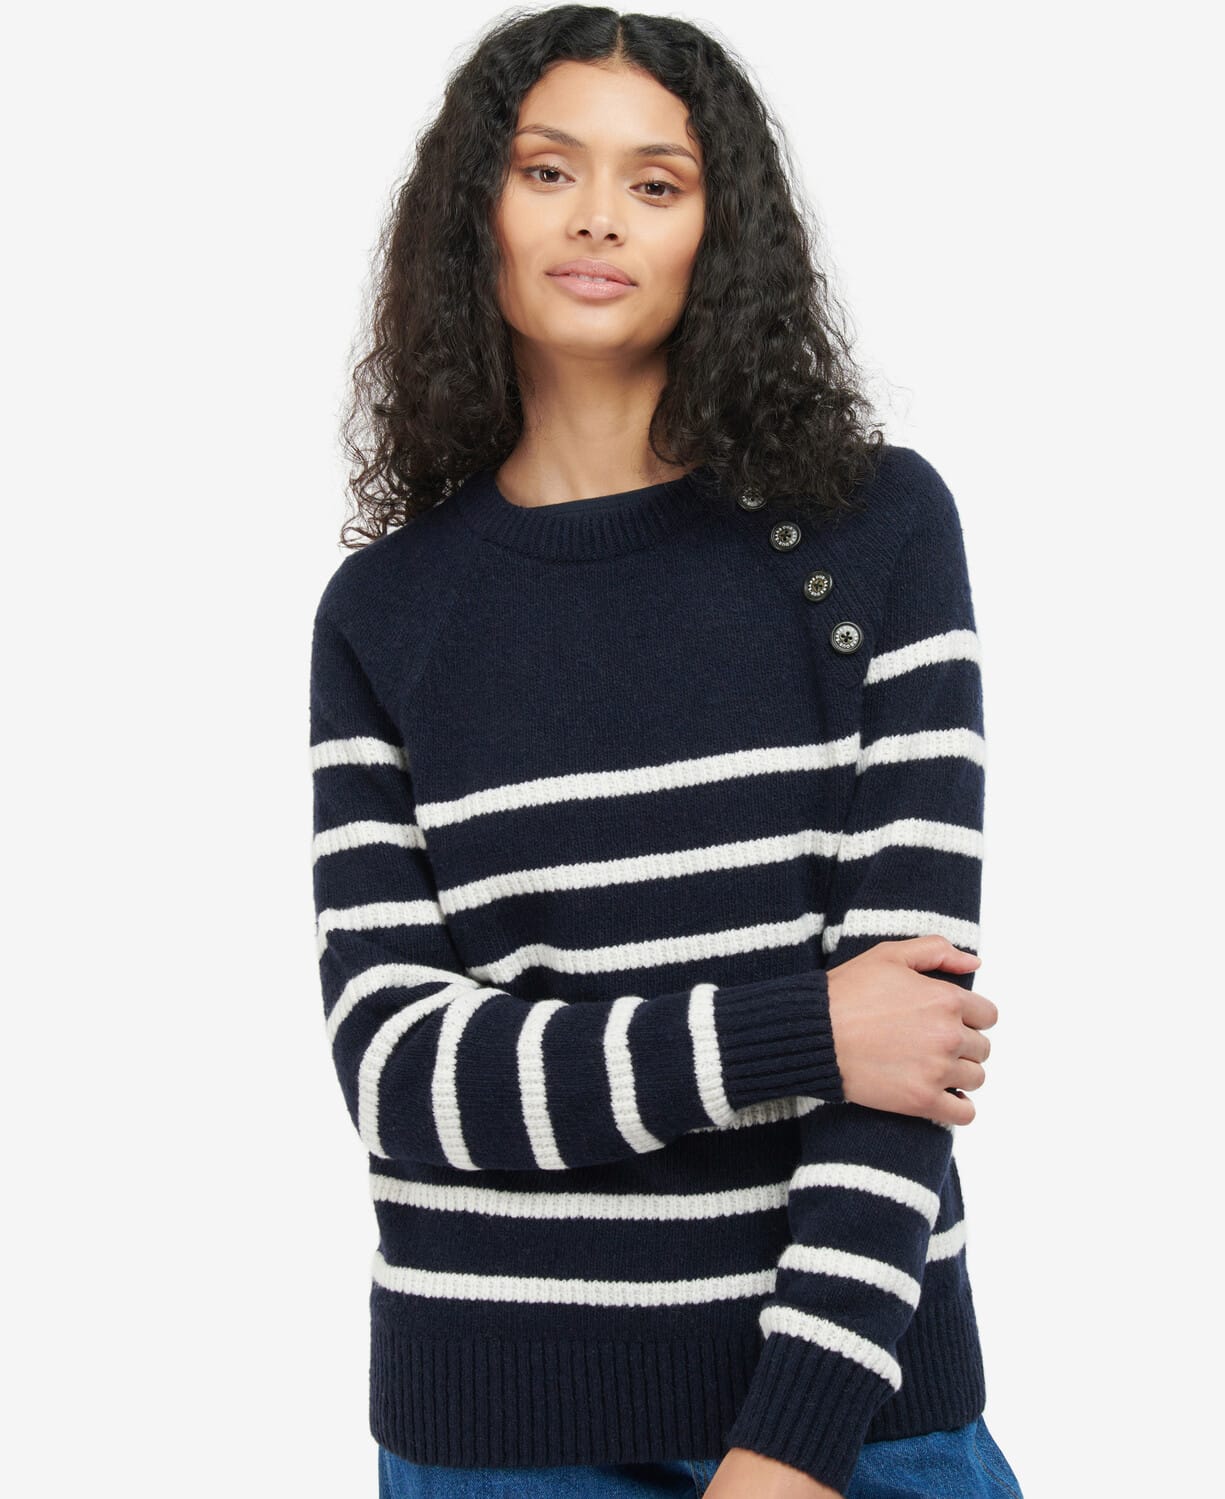 Belmount Jumper - Navy - Out and About